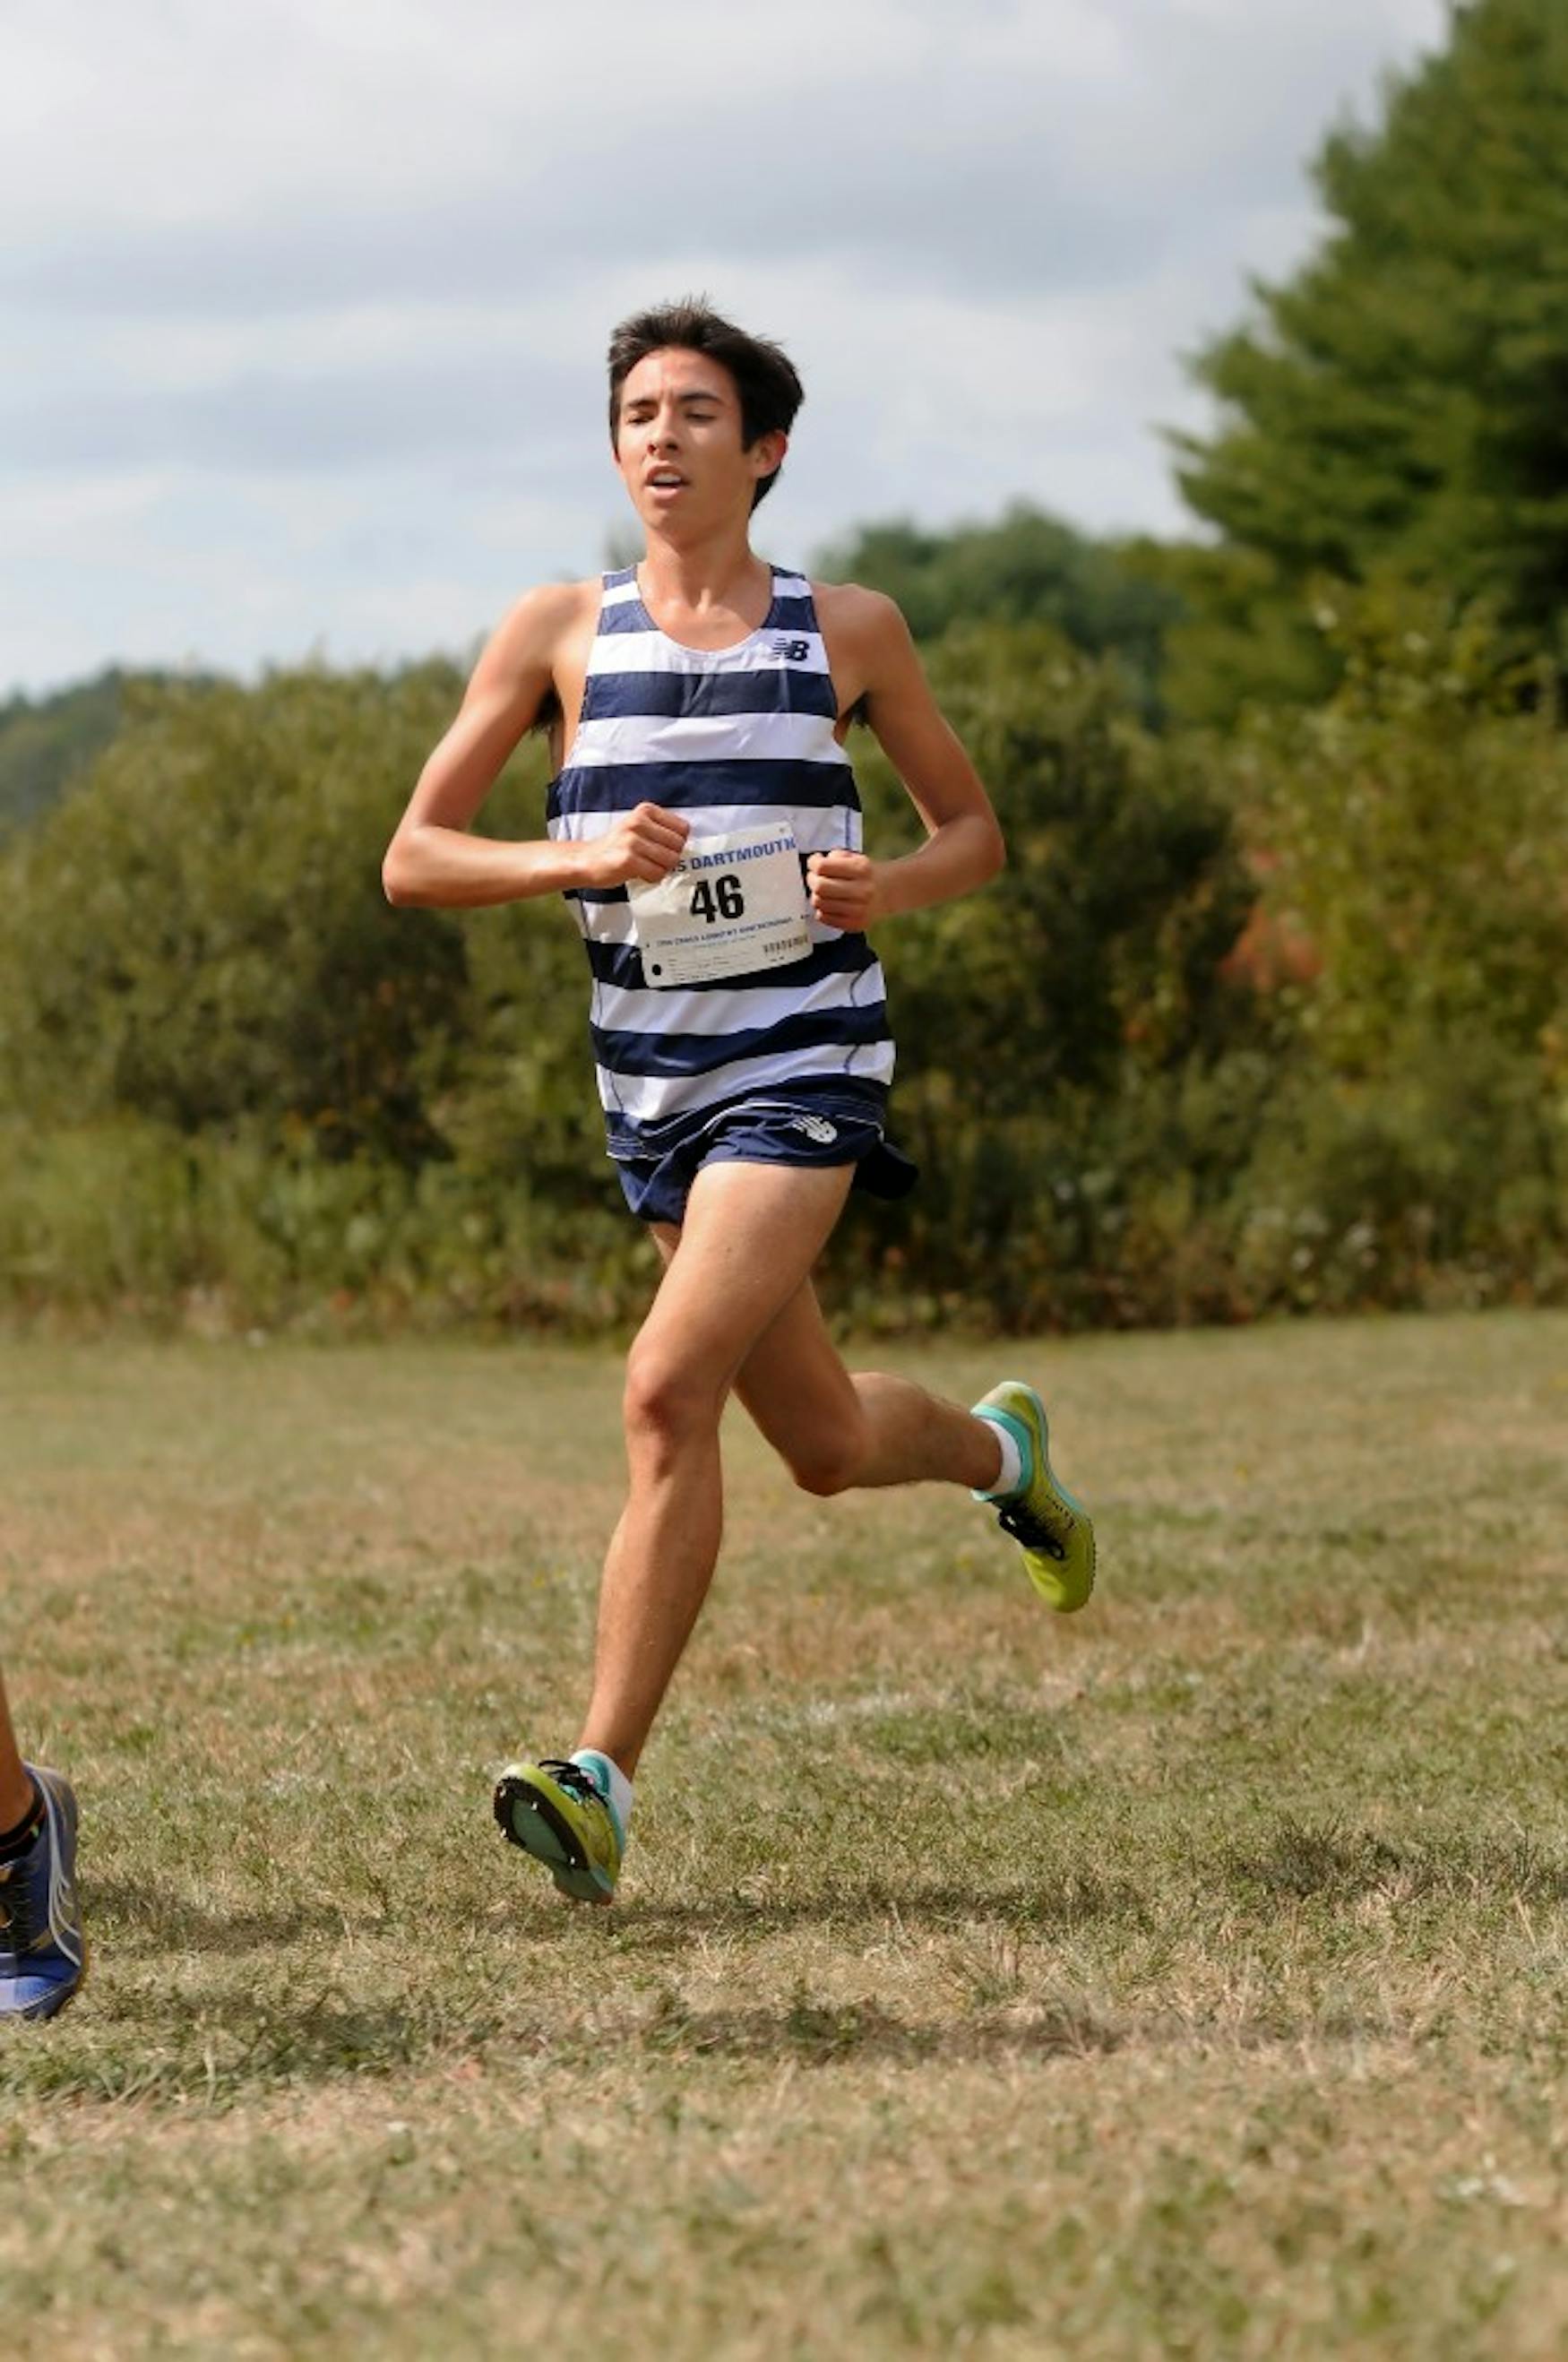 FAST START: Ryan Stender ’18 runs at the UMass Dartmouth Invitational on Sept. 20, where he placed 19th out of 255 runners.